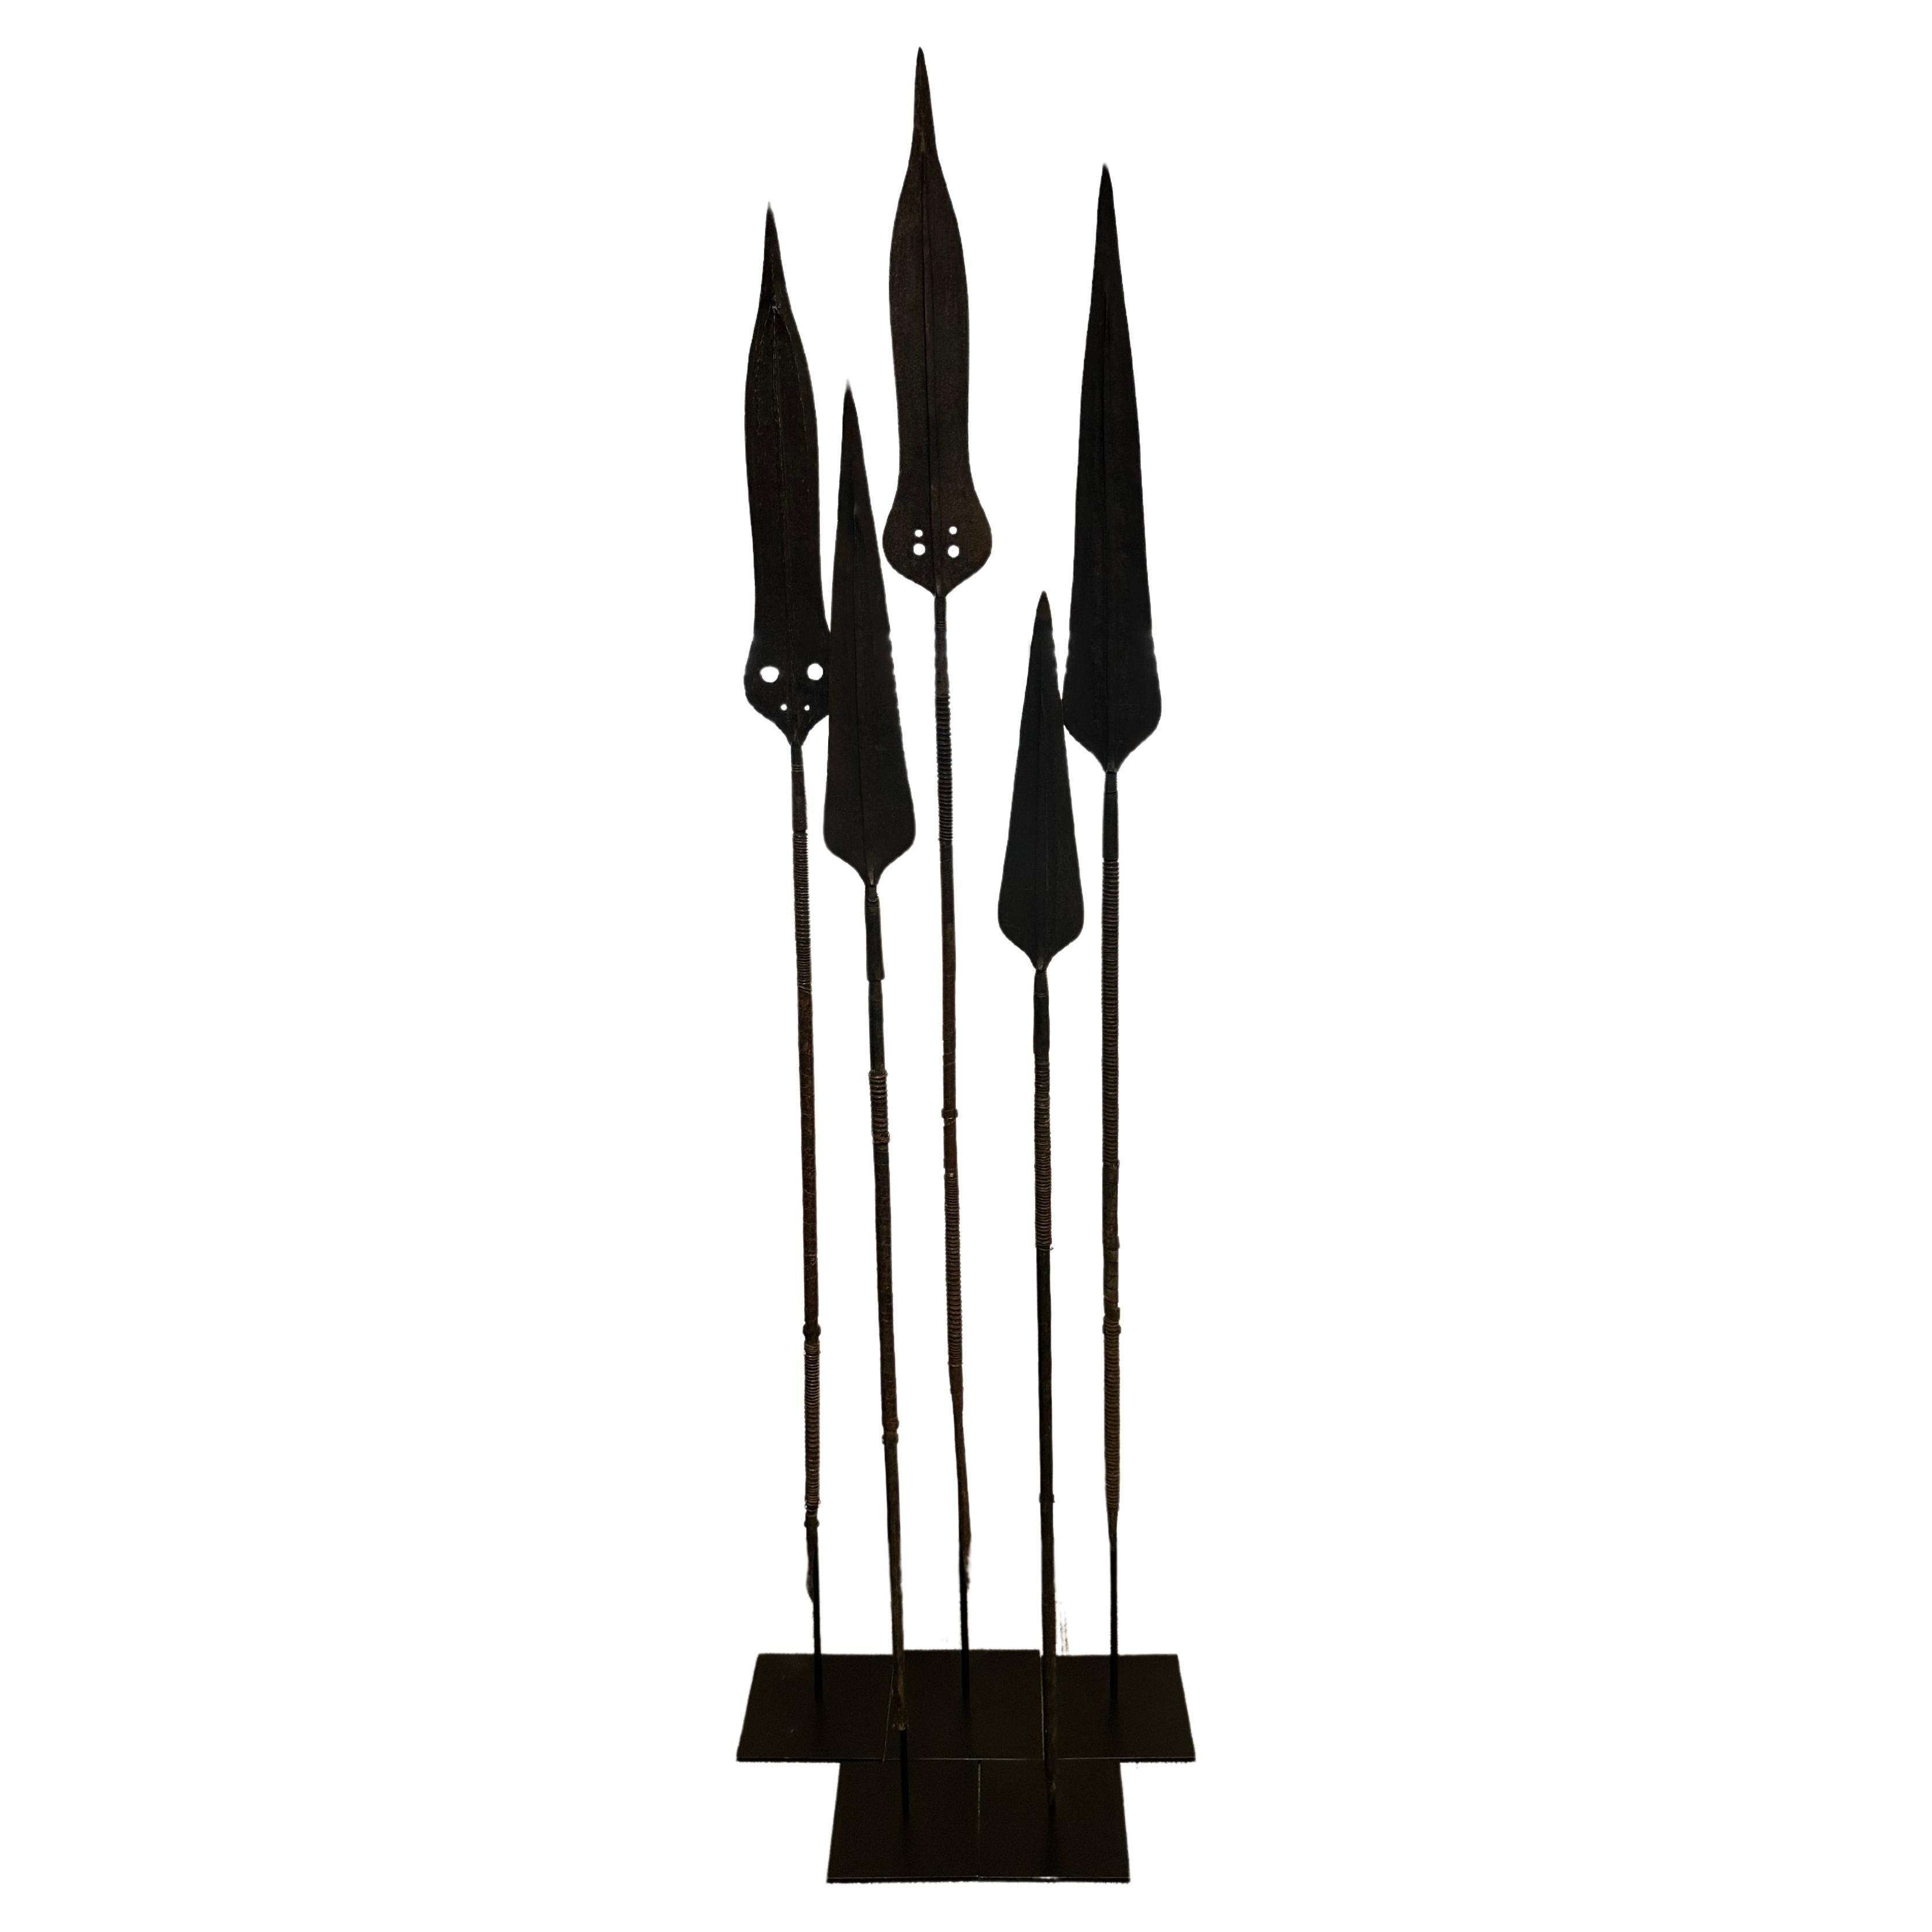 African Ceremonial Iron and Wood Spears